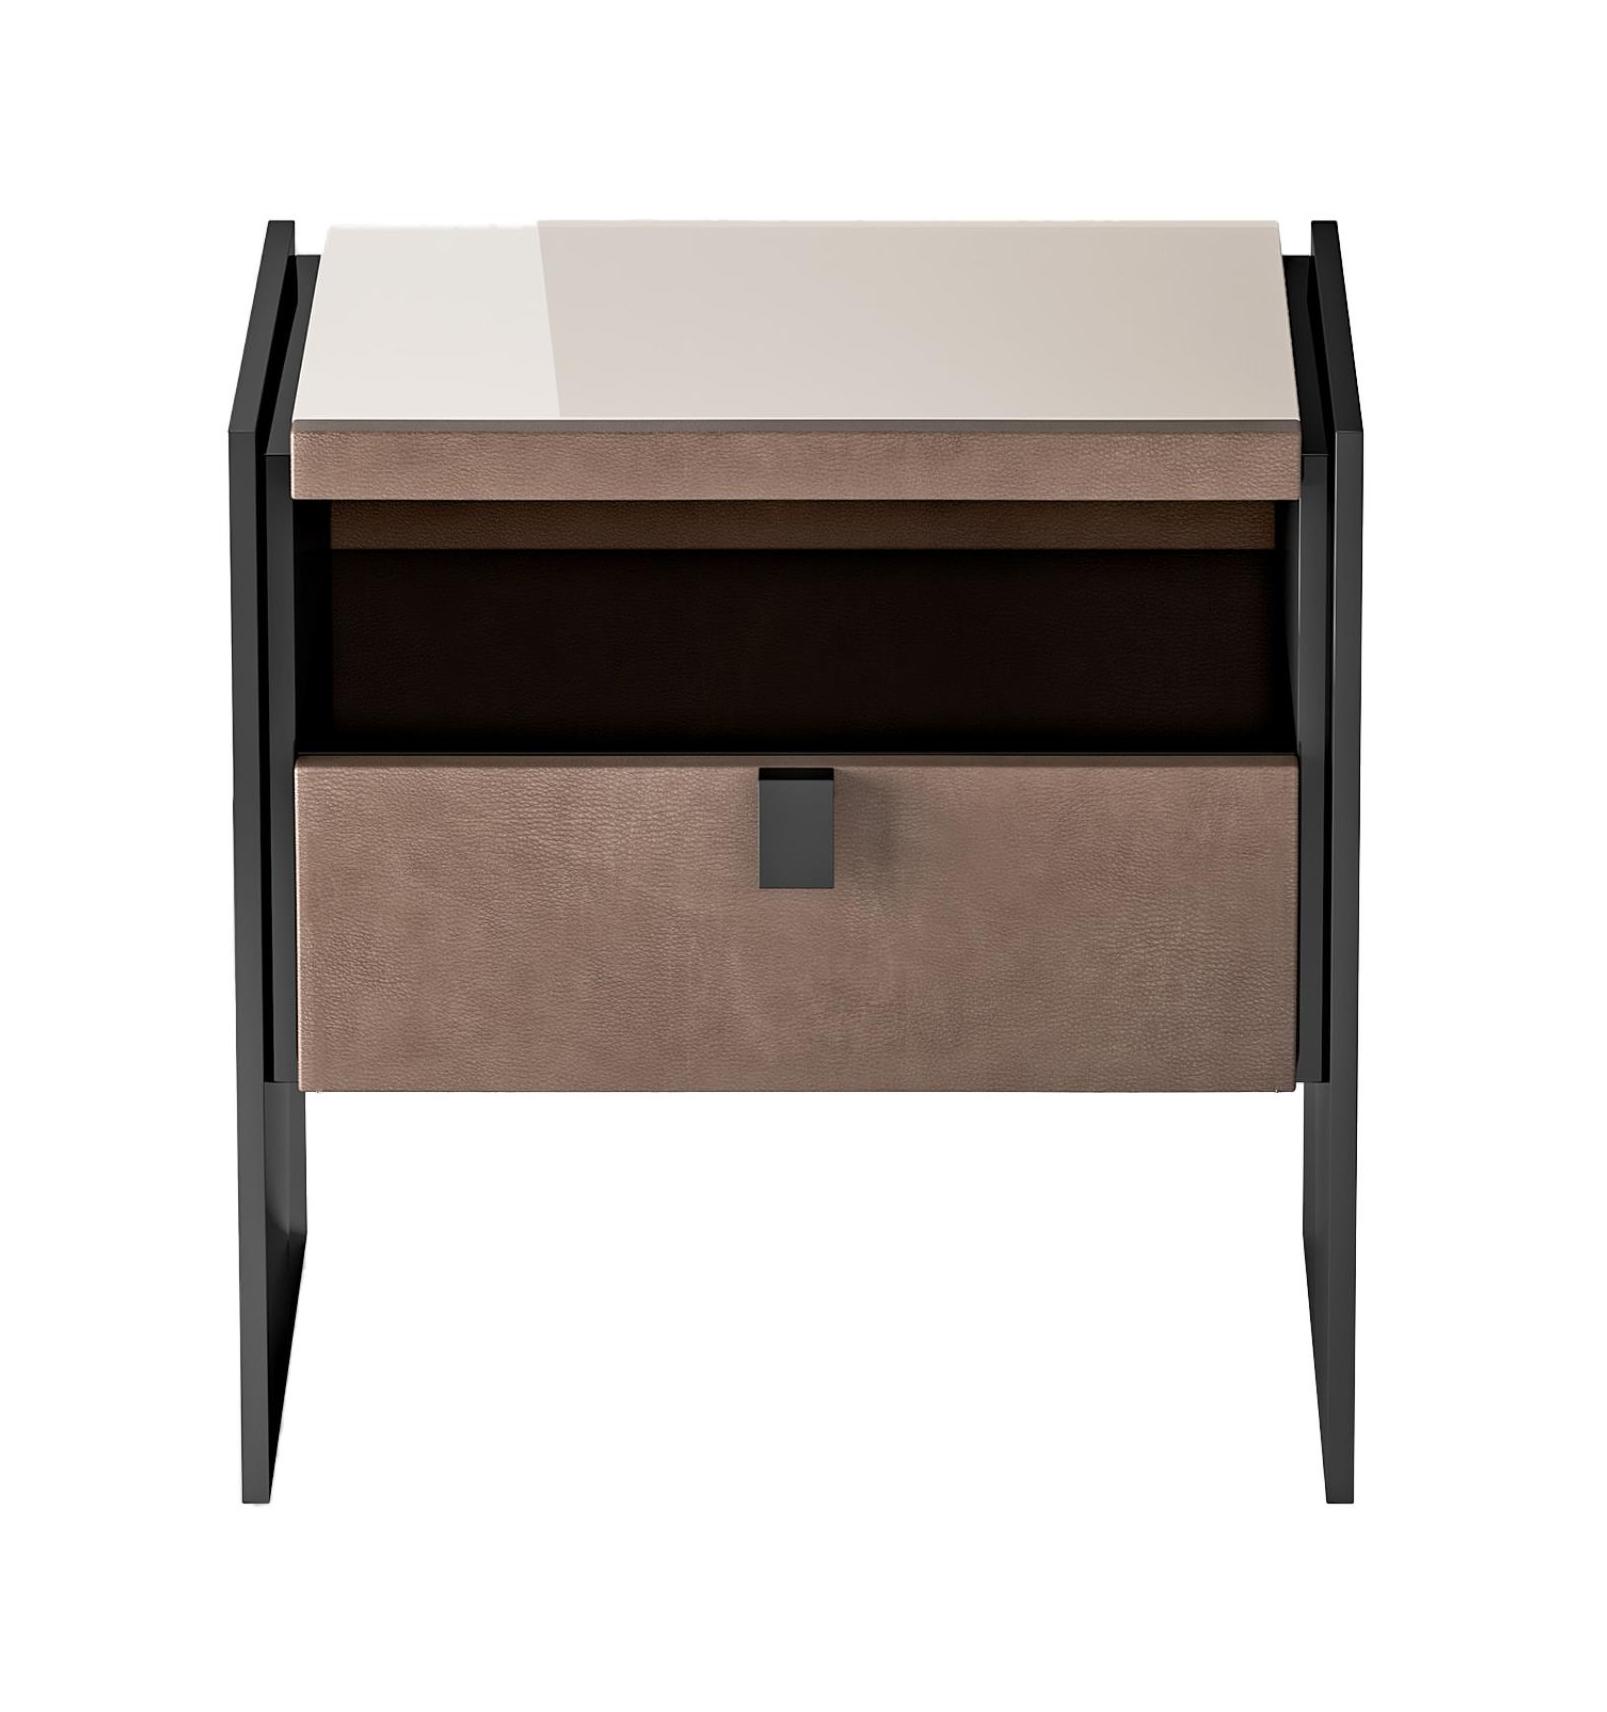 Nightstand with Open Space And Leather Doors